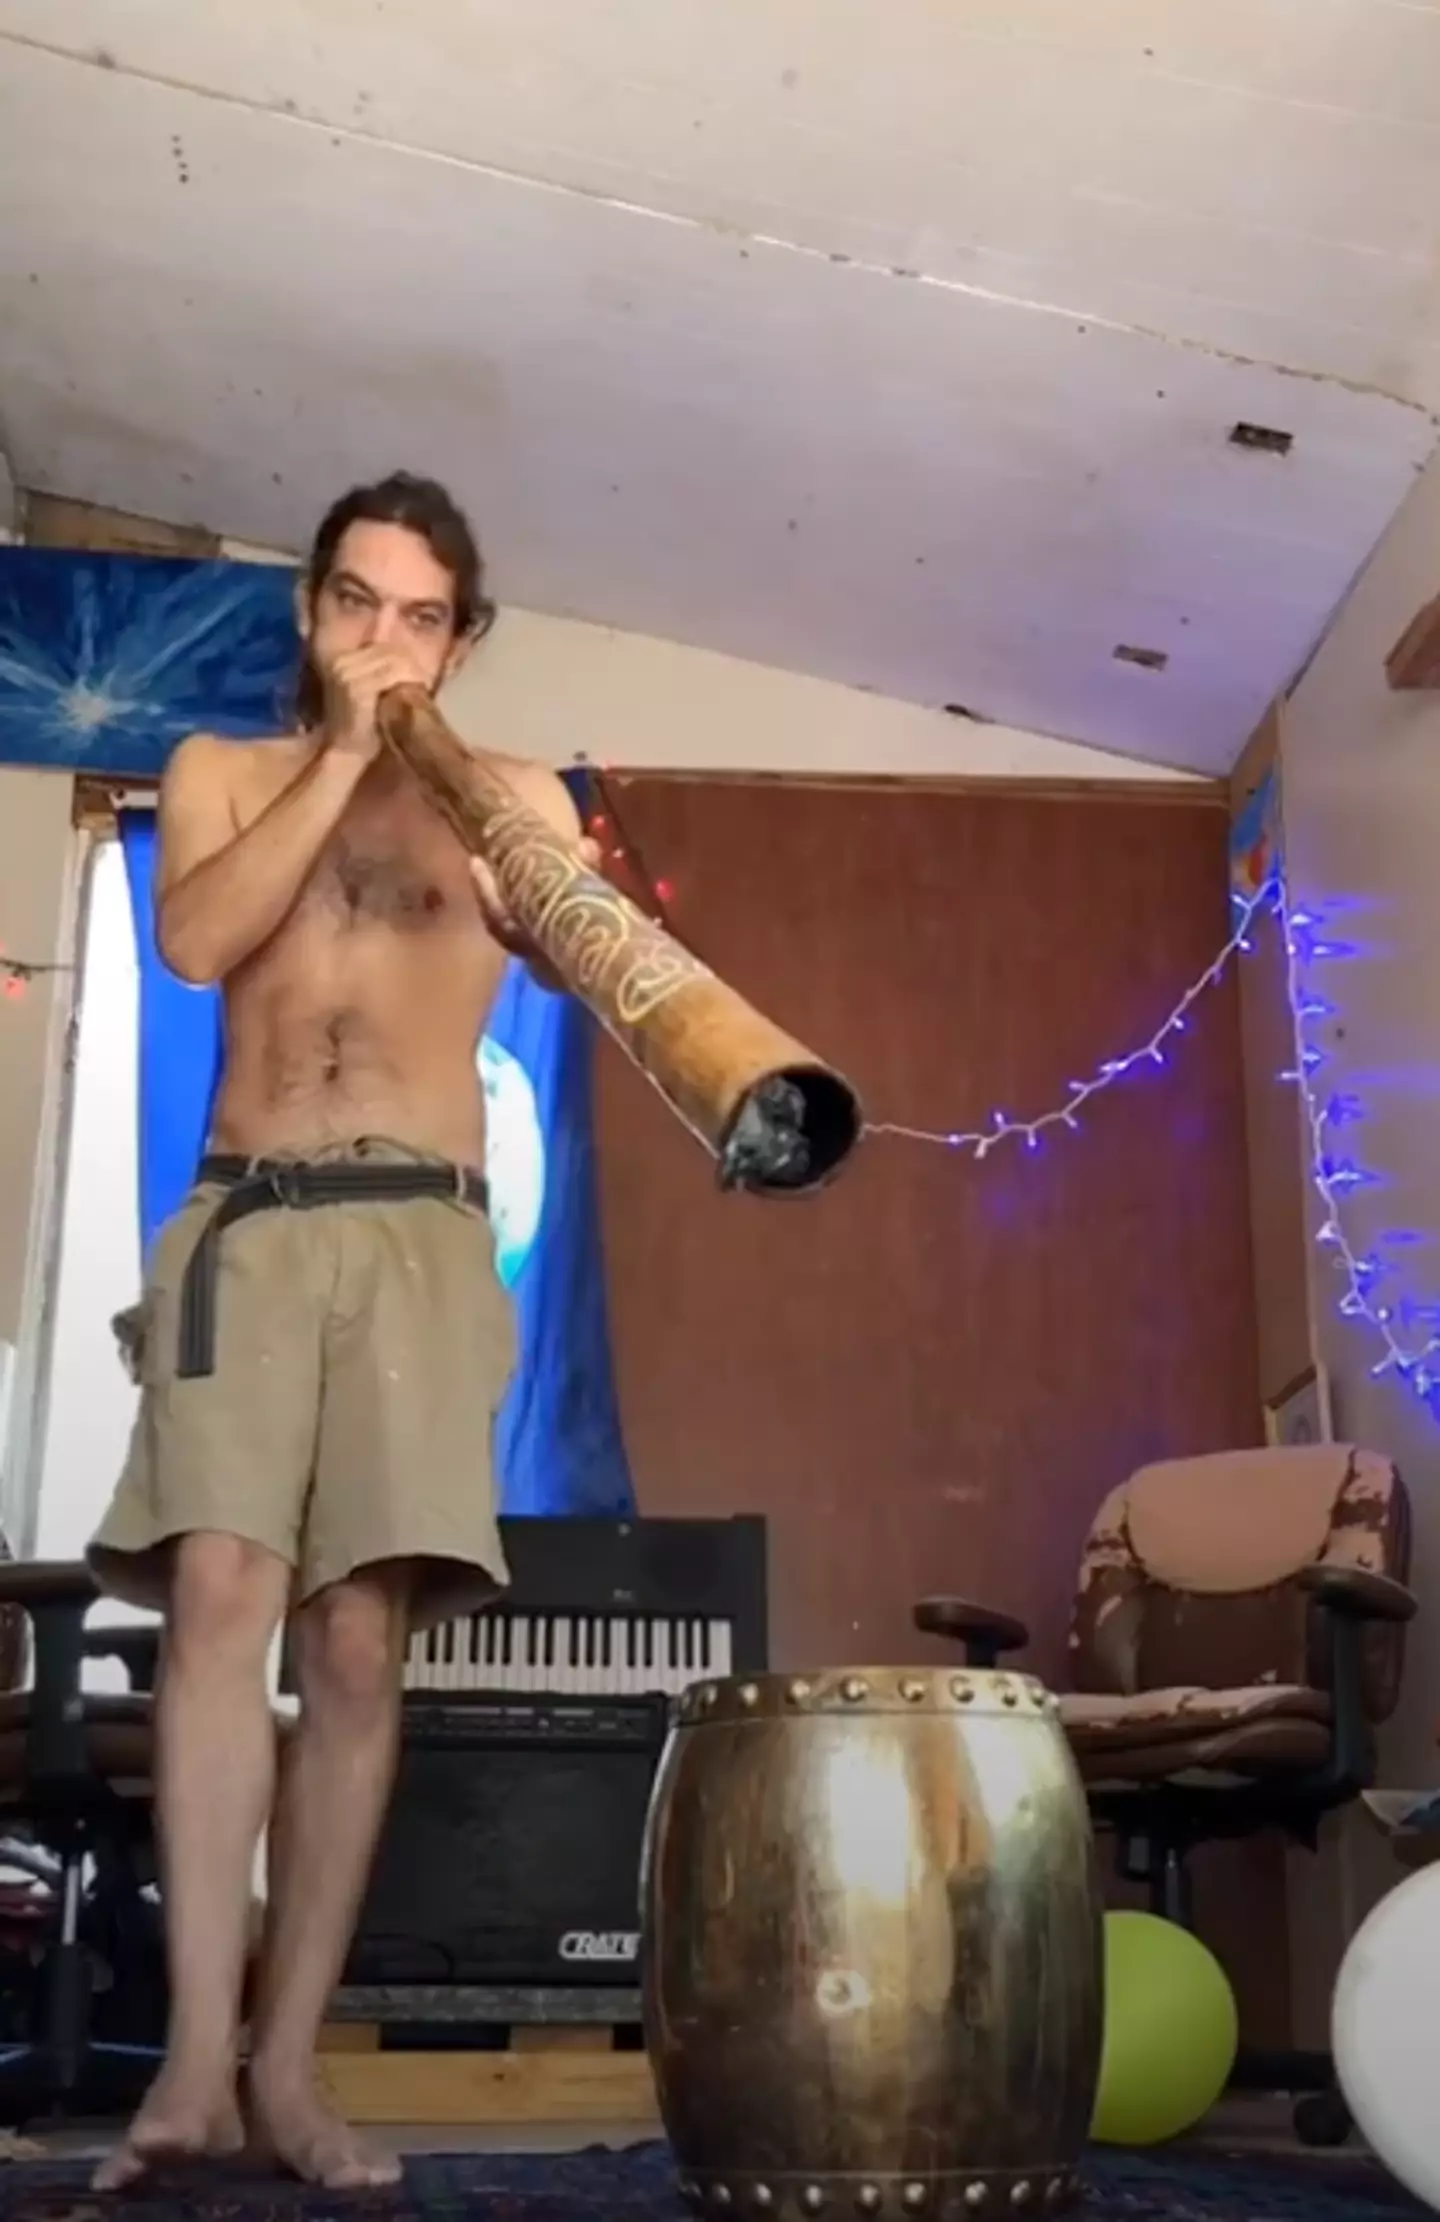 Here's some didgeridoo playing to get you in the mood for your Saturday night.